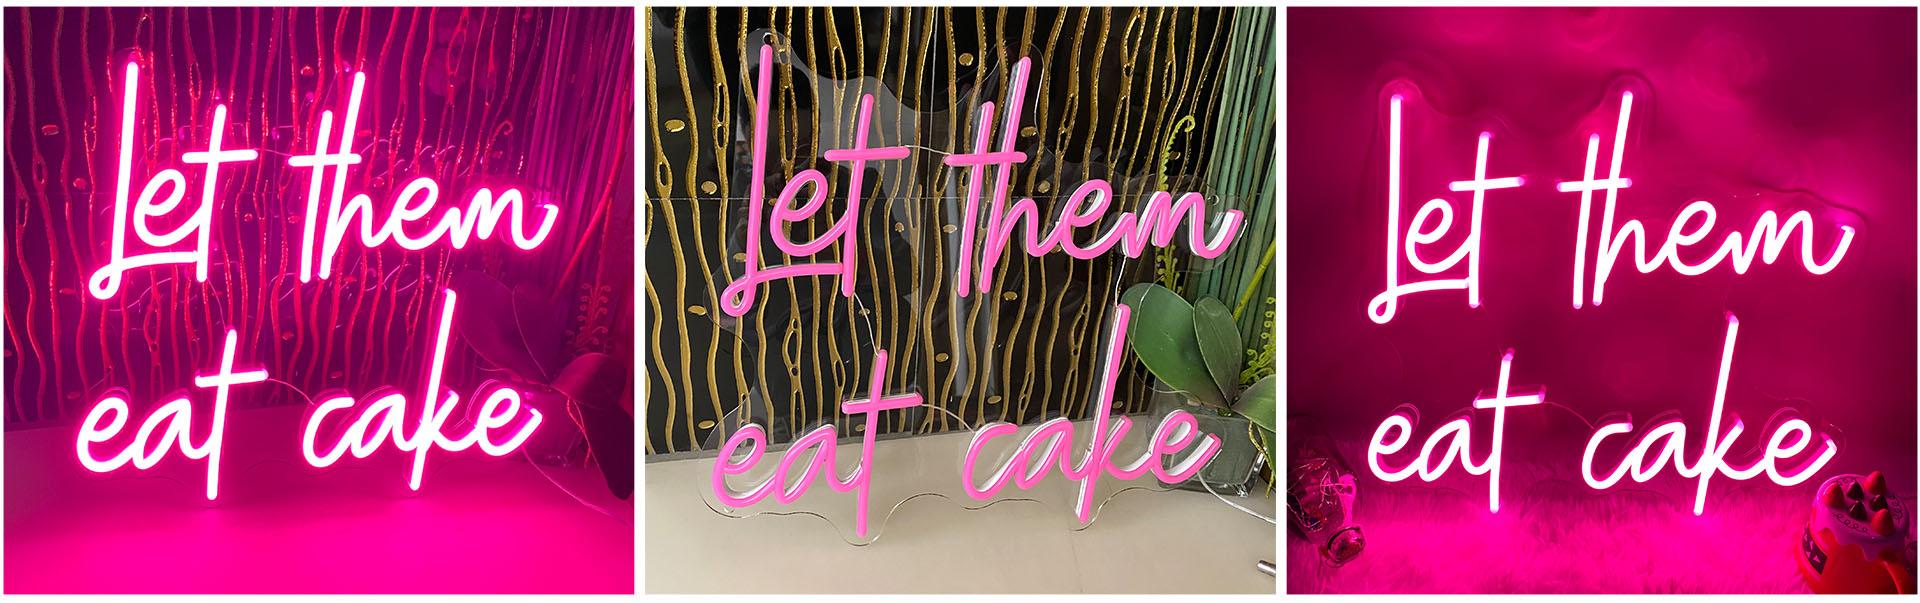 let them cake neon sign